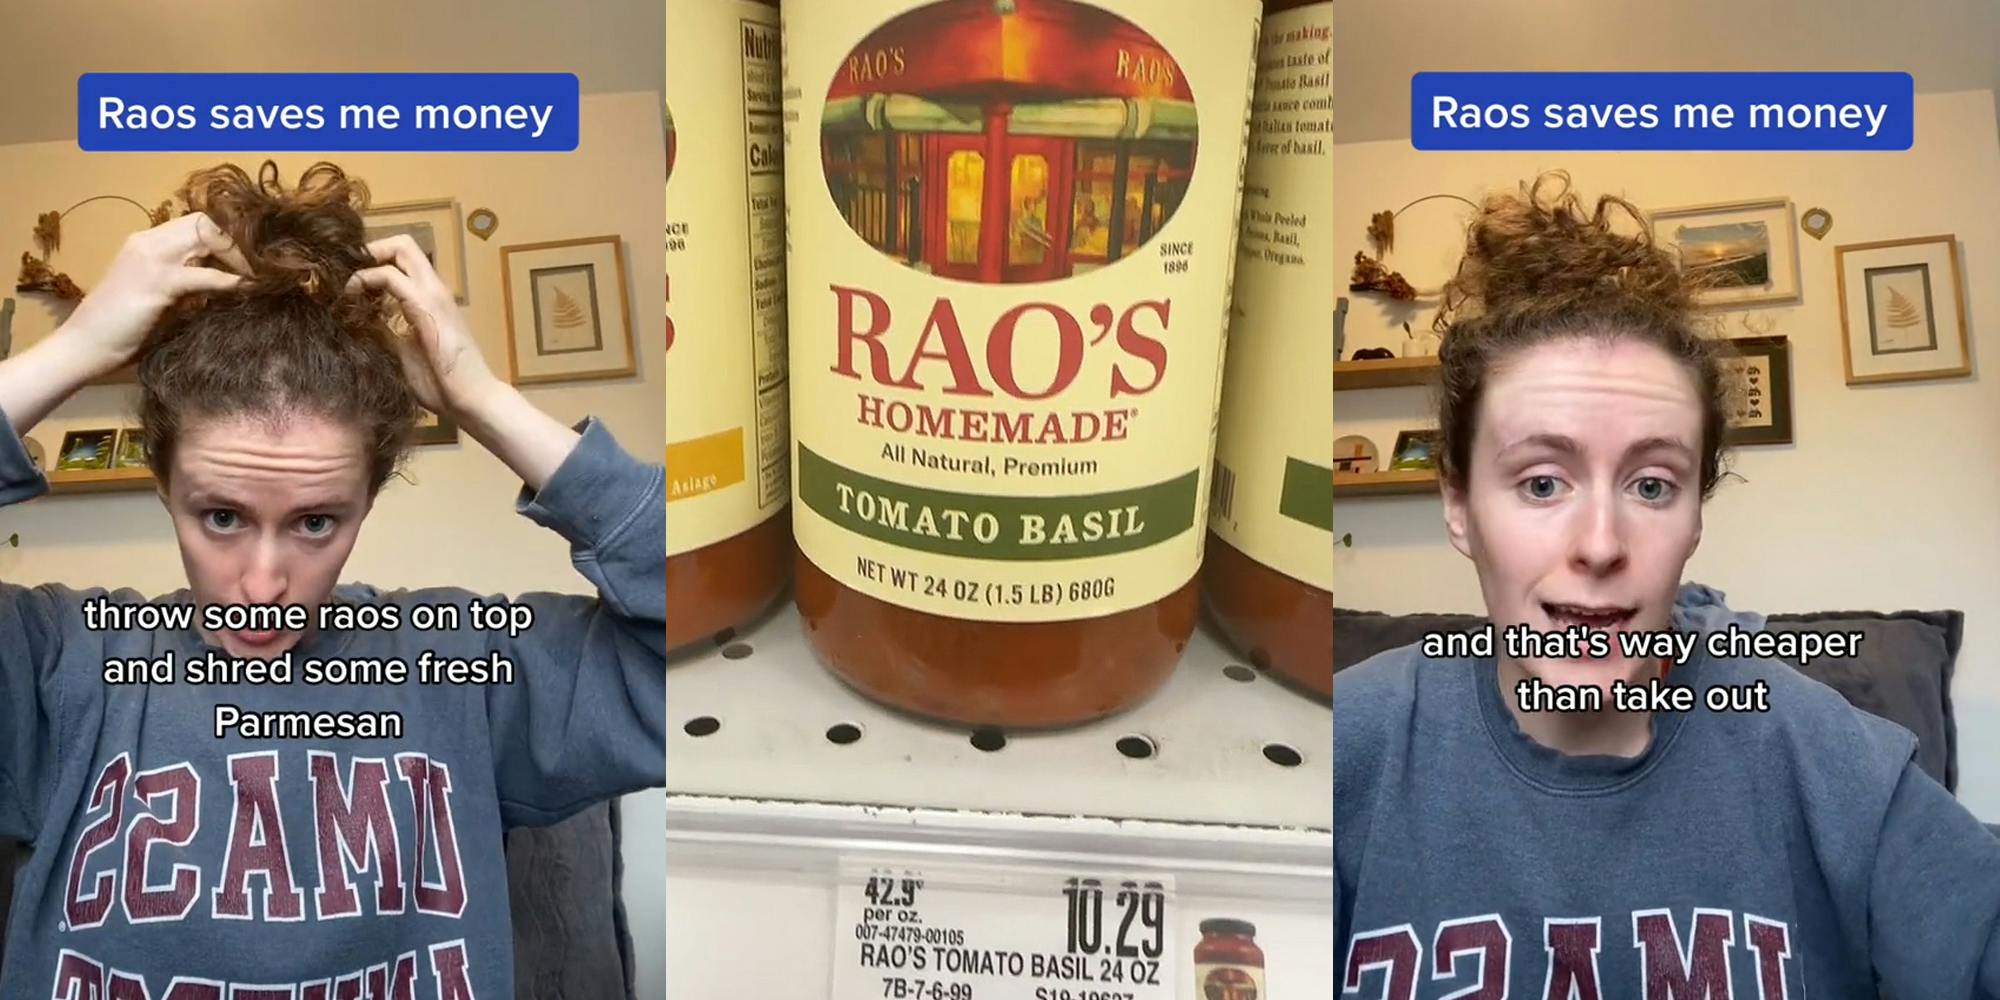 person speaking while putting hair up in bun with caption "Raos saves me money" "throw some raos on top and shred some fresh Parmesan" (l) Rao's sauce in can for $10.29 (c) person speaking on couch with caption "Raos saves me money" "and that's way cheaper than tale out" (r)